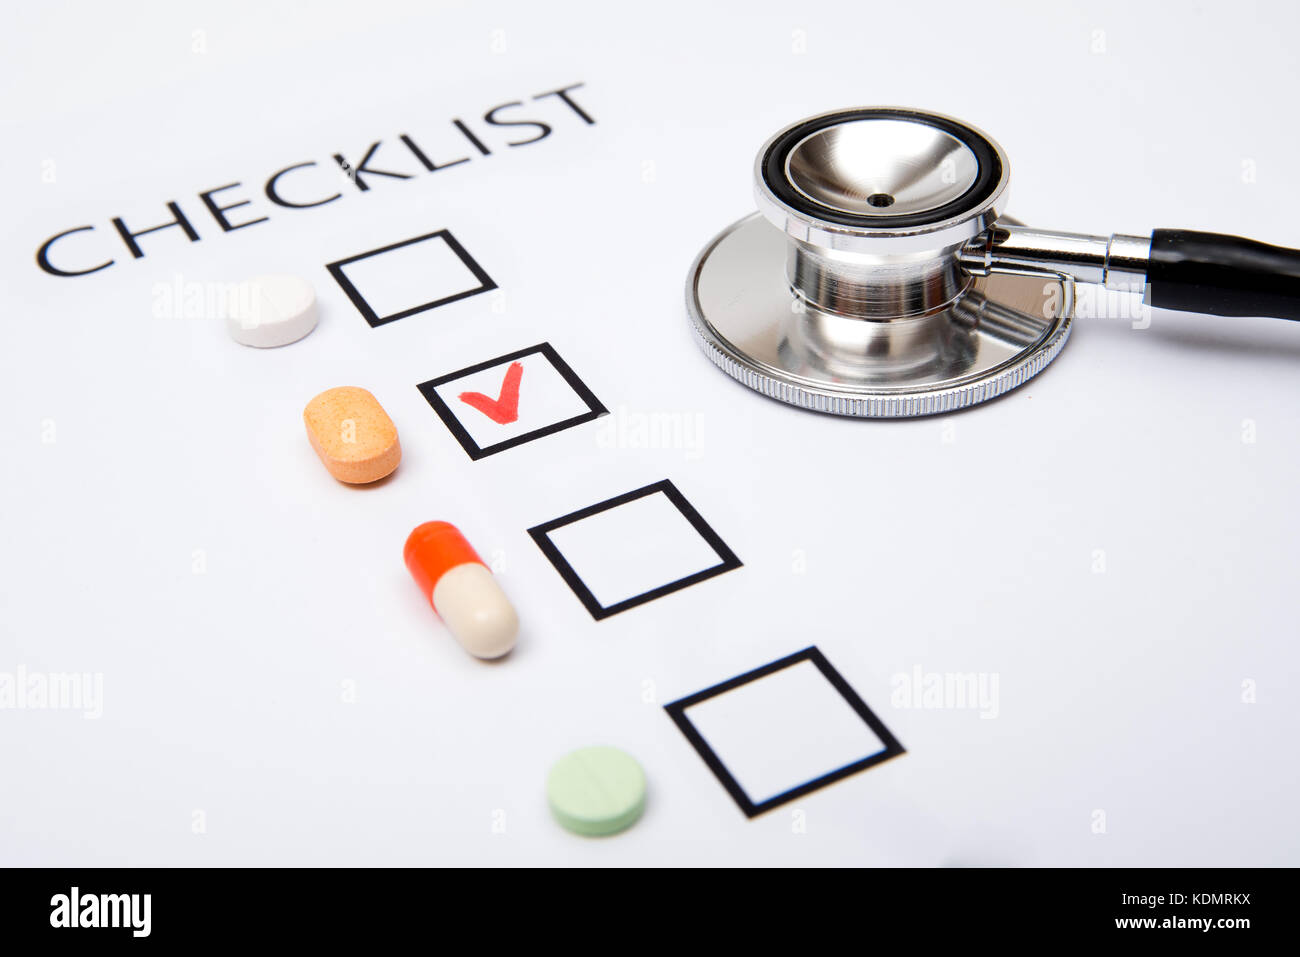 Checklist on white paper with stethoscope Stock Photo